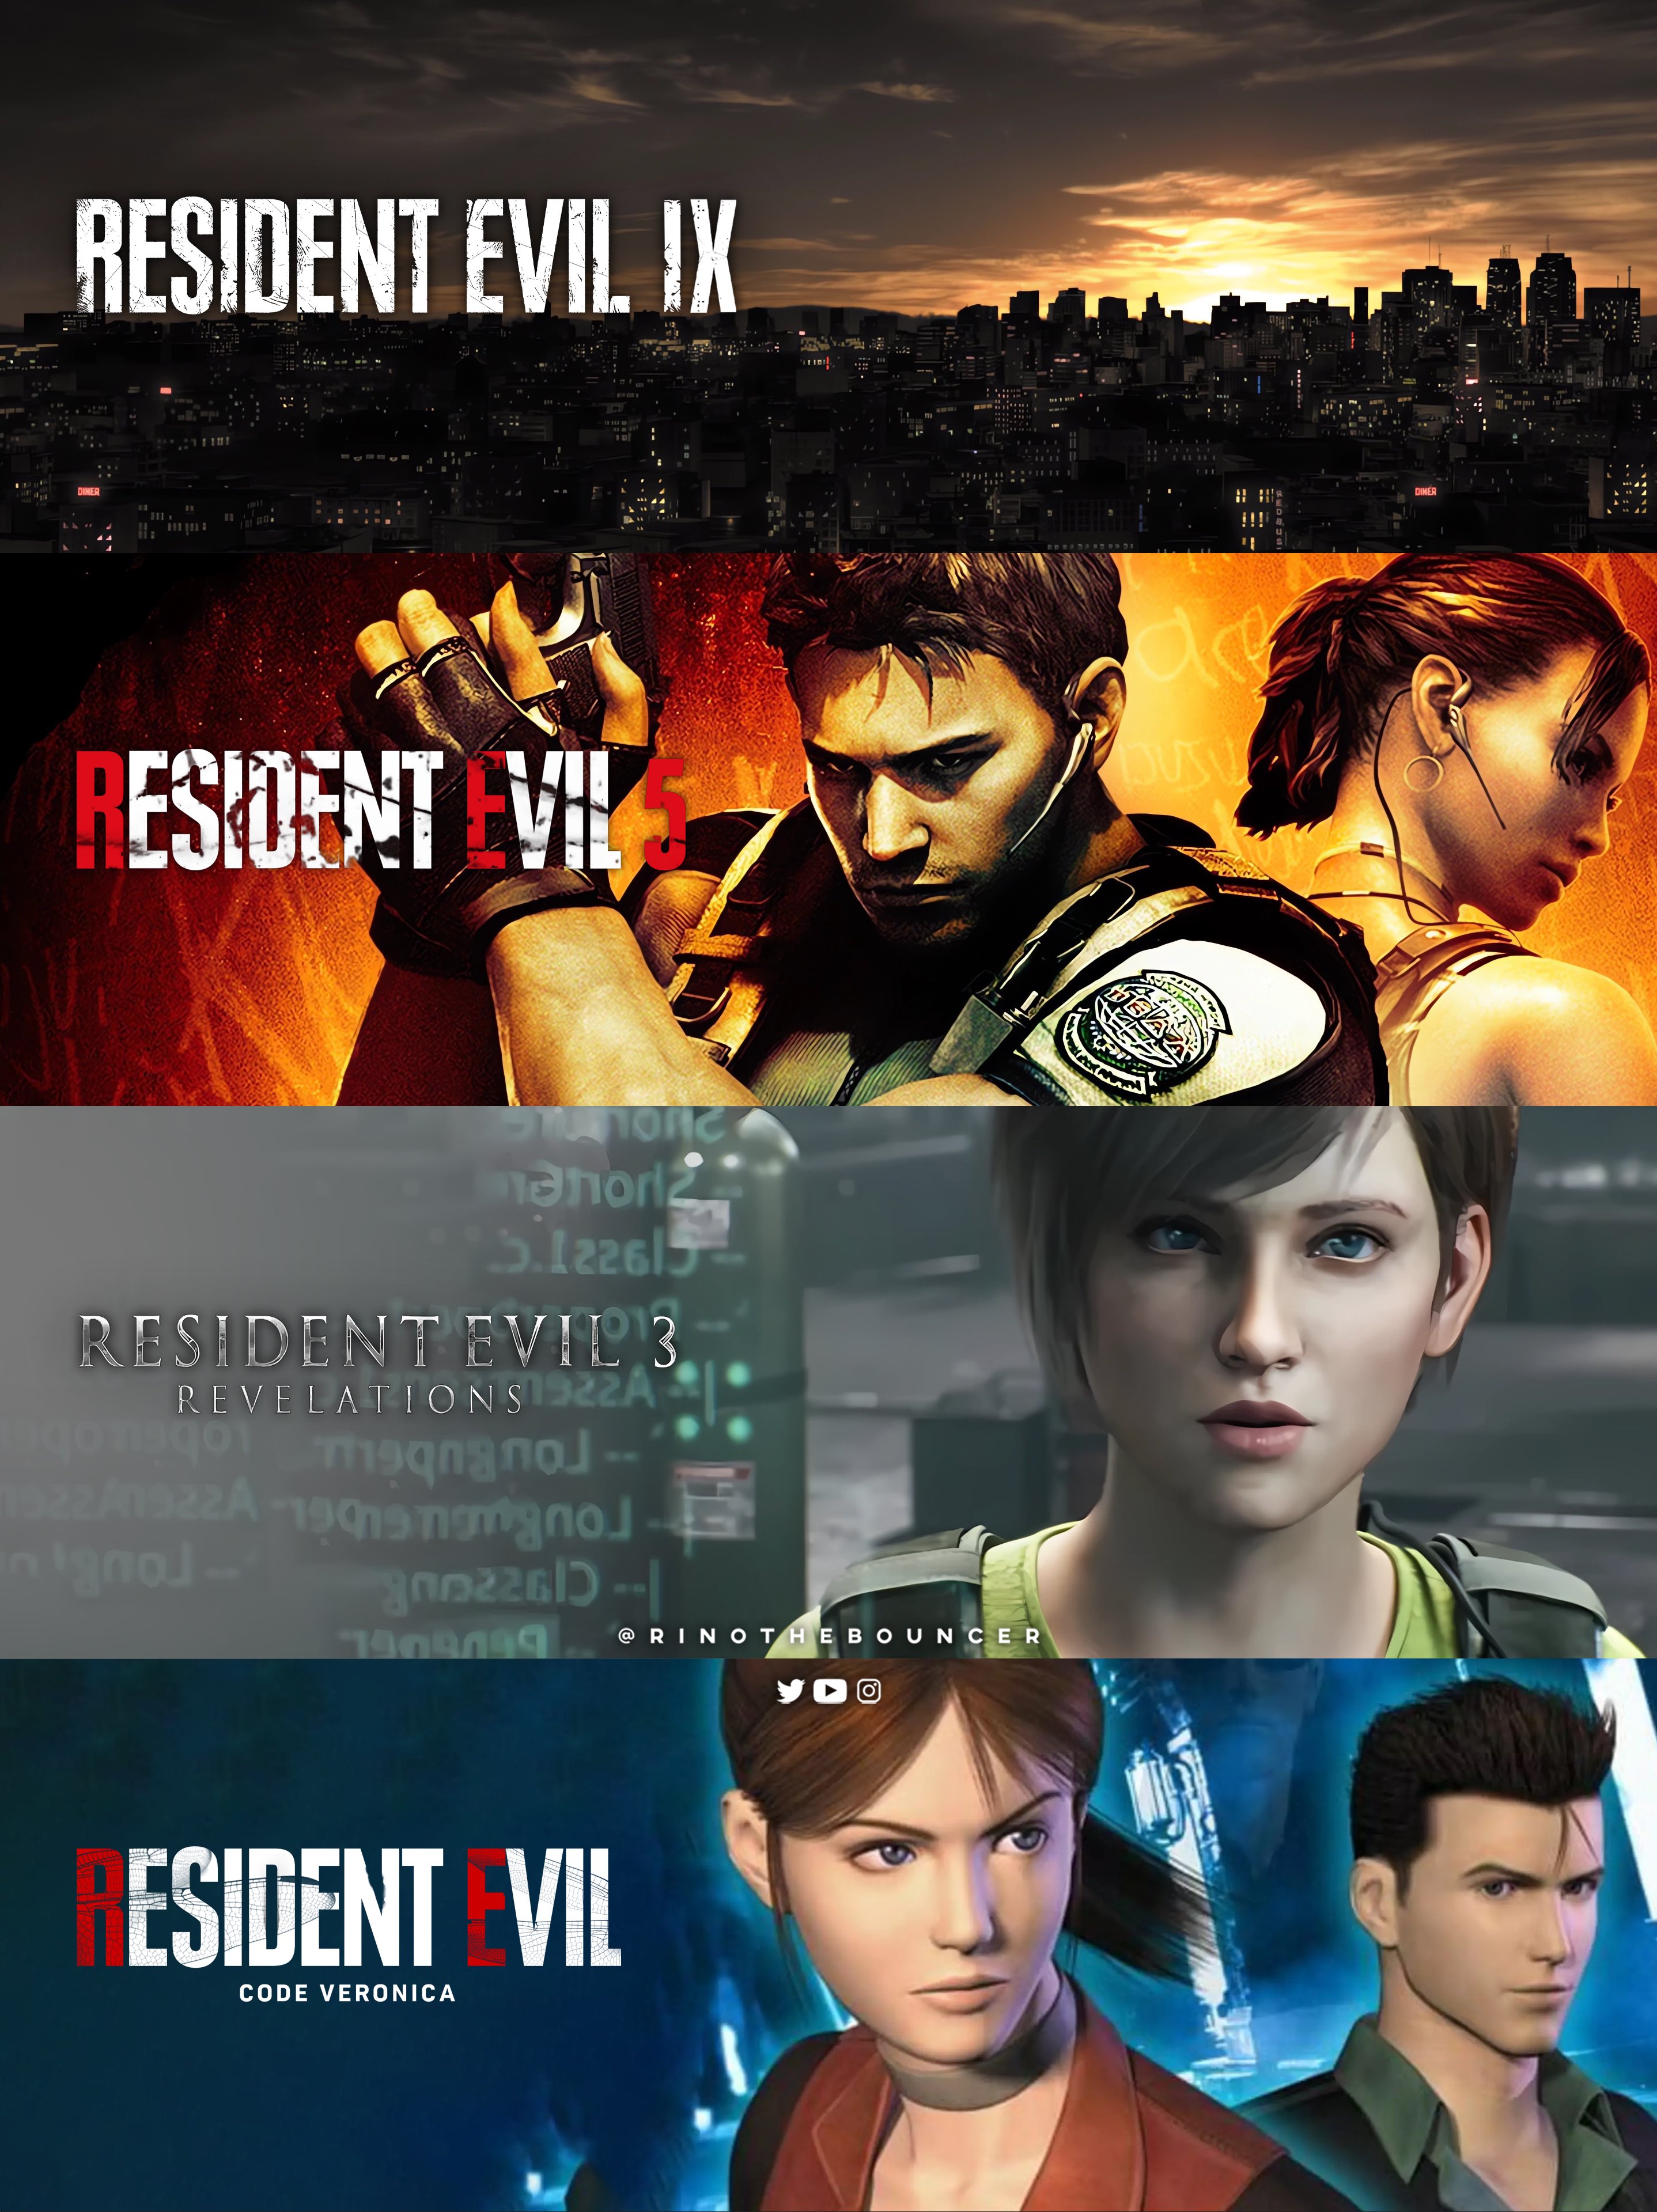 Rino on X: What do you wish to get next from the #ResidentEvil  franchise?🚀 ✓Resident Evil 9 (next mainline game) ✓Resident Evil 5  (remake) ✓Resident Evil: Revelations 3 ✓Resident Evil: Code Veronica (